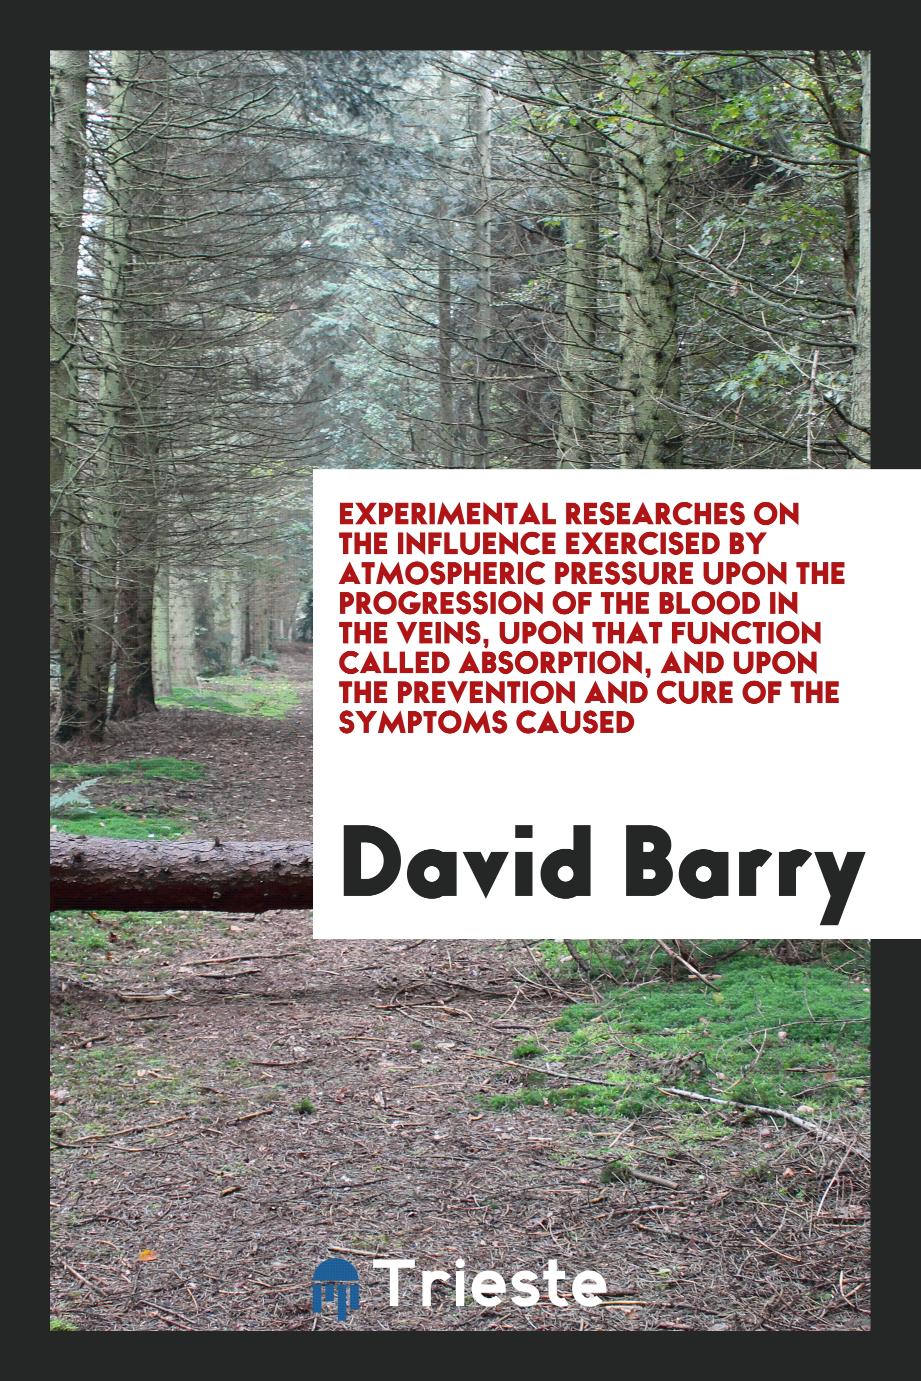 David Barry - Experimental Researches on the Influence Exercised by Atmospheric Pressure upon the Progression of the Blood in the Veins, upon That Function Called Absorption, and upon the Prevention and Cure of the Symptoms Caused